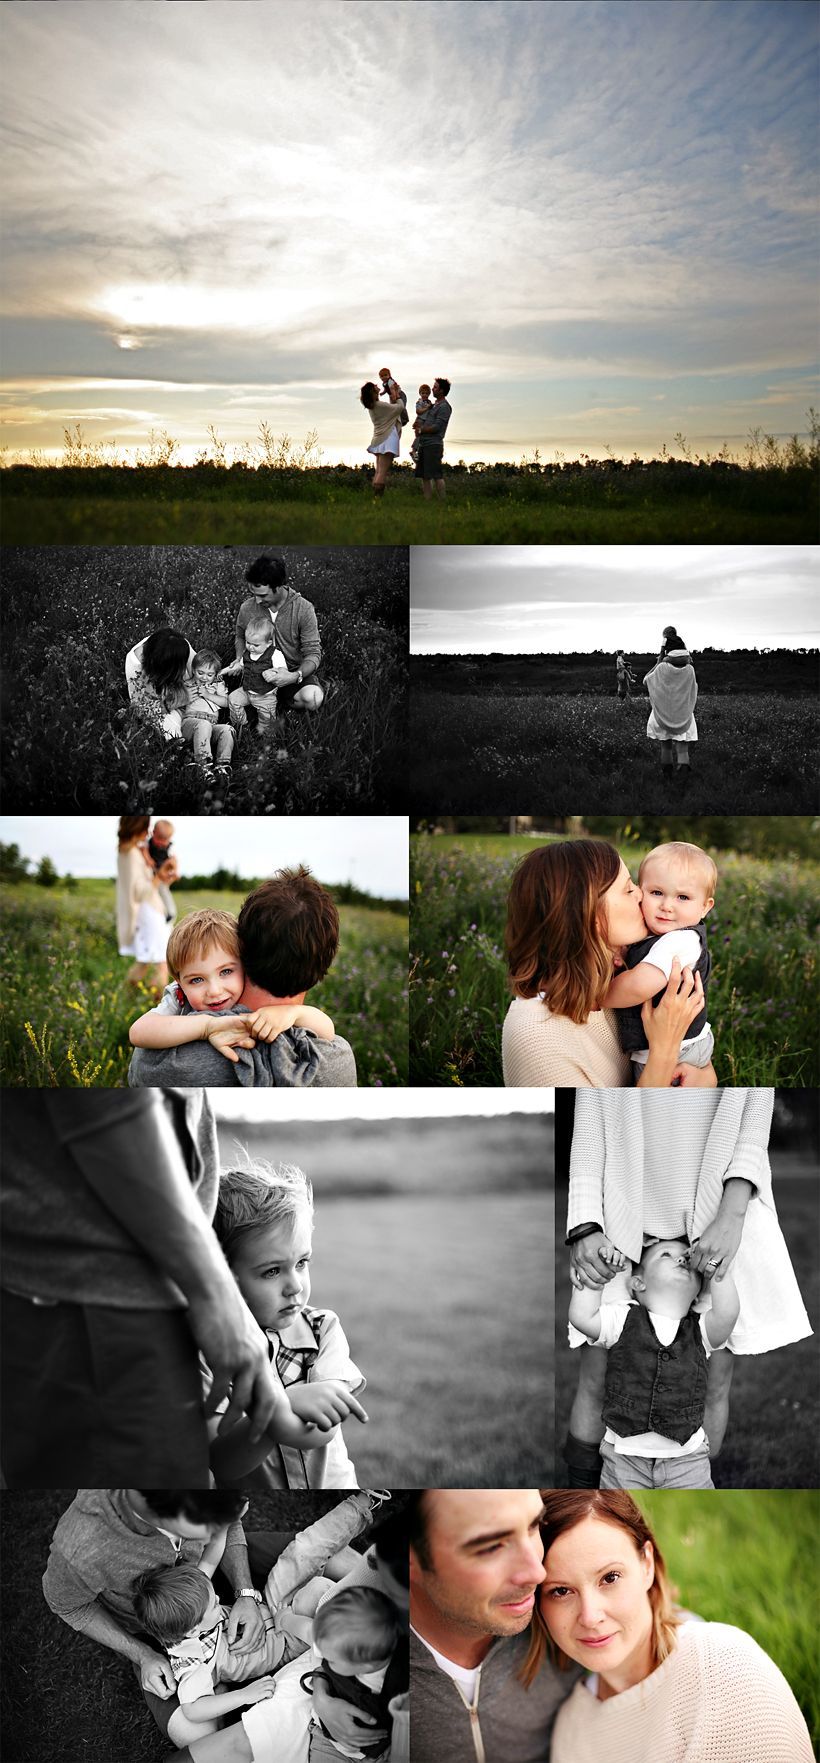 beautiful family photography (as always) by @Andrea Hanki